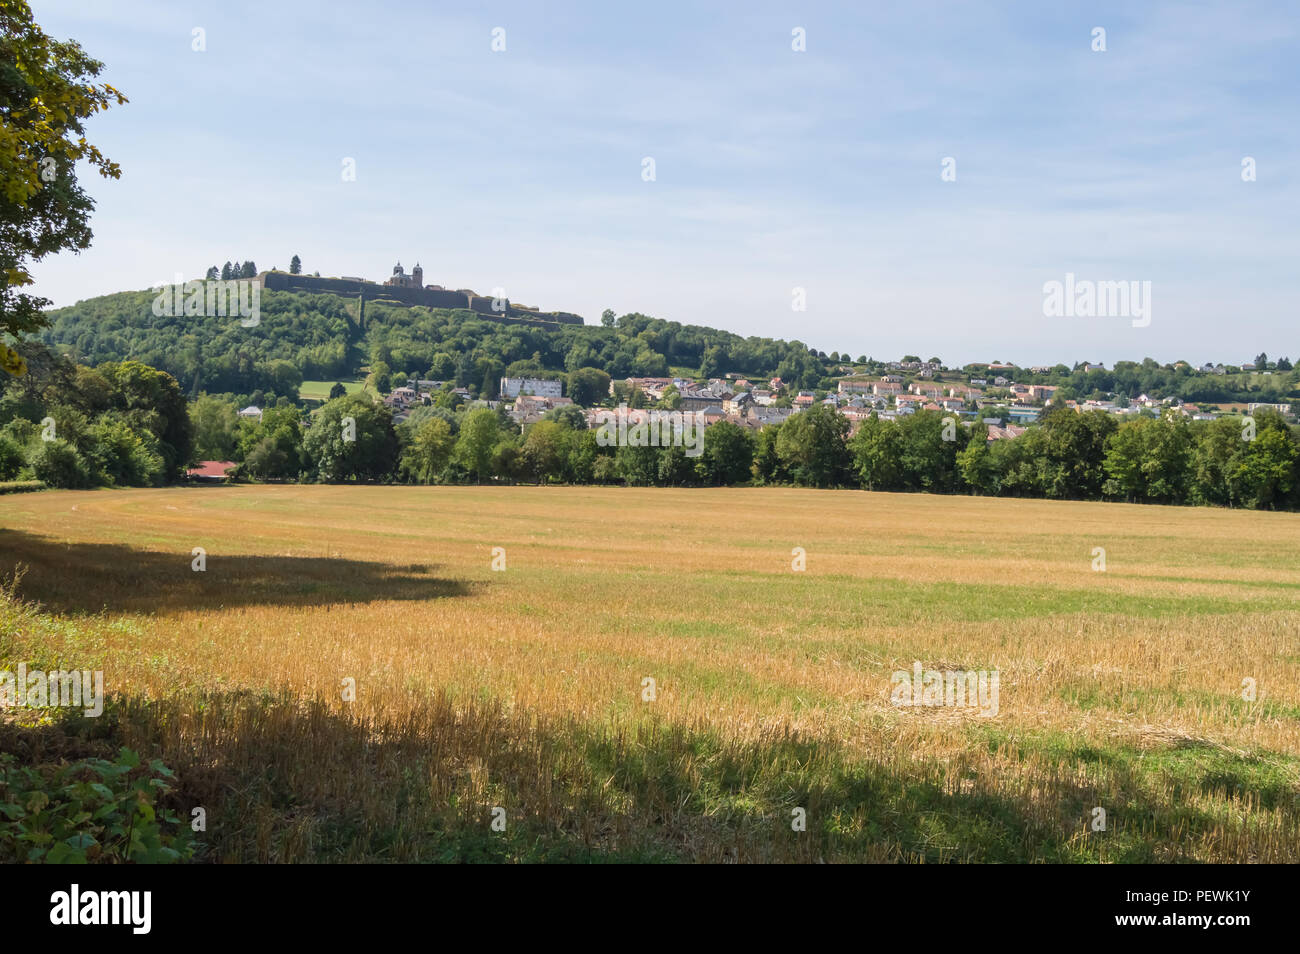 View of the citadel and the city of Montmédy in the department of Meuse in France Stock Photo